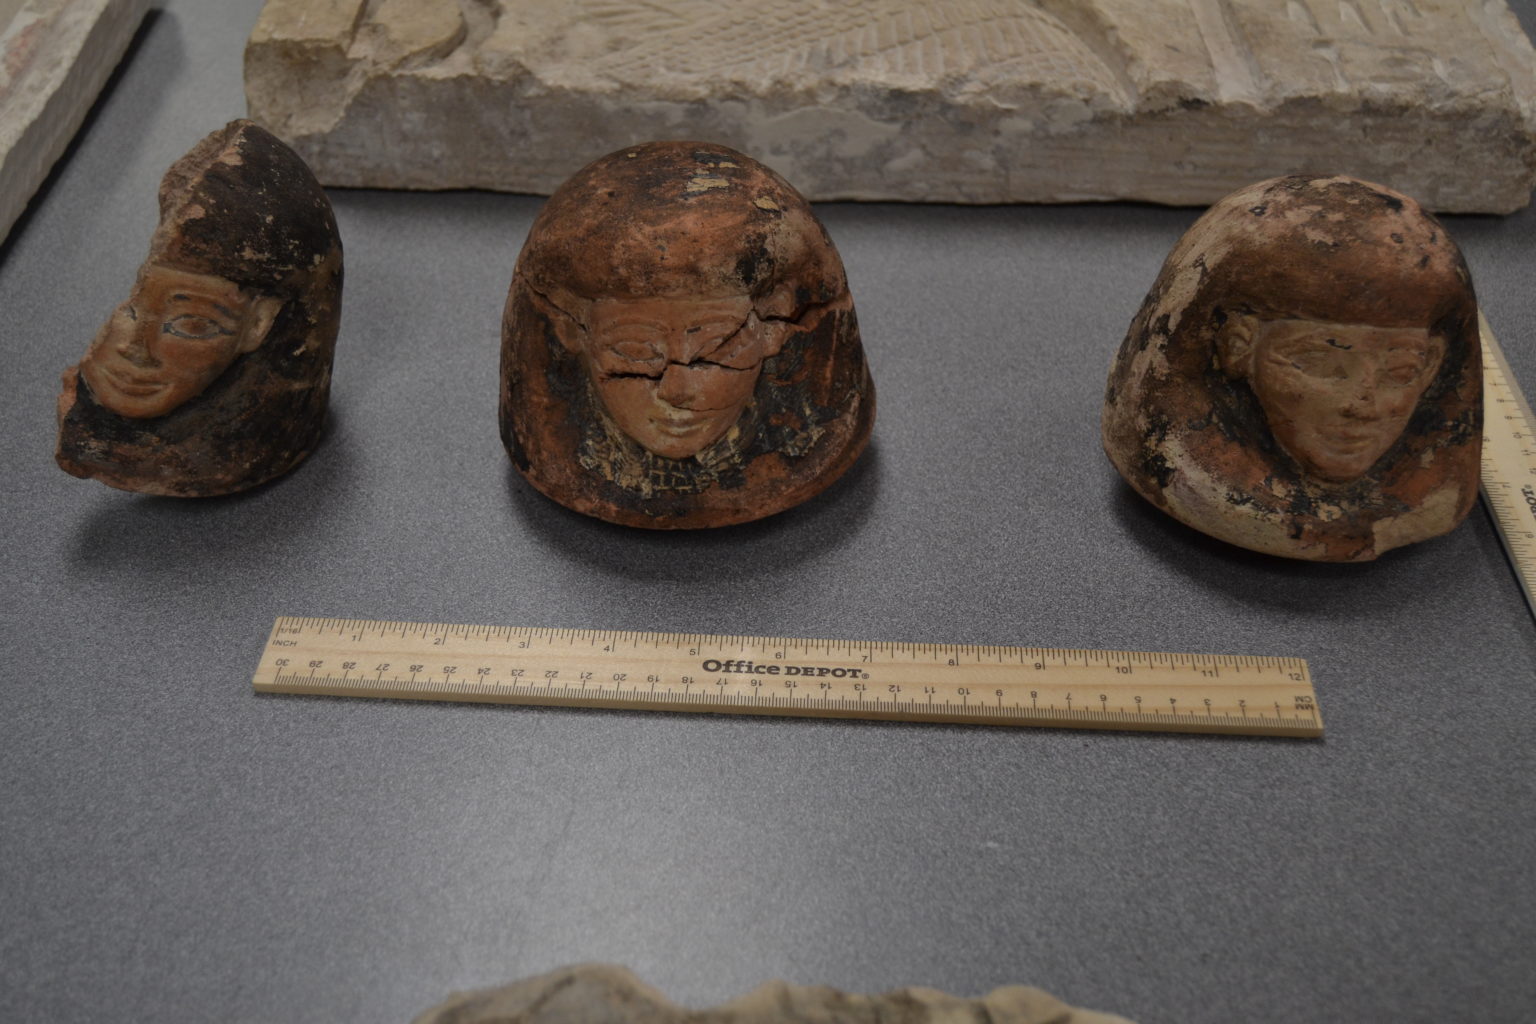 Brooklyn man indicted in federal court for smuggling Egyptian artifacts